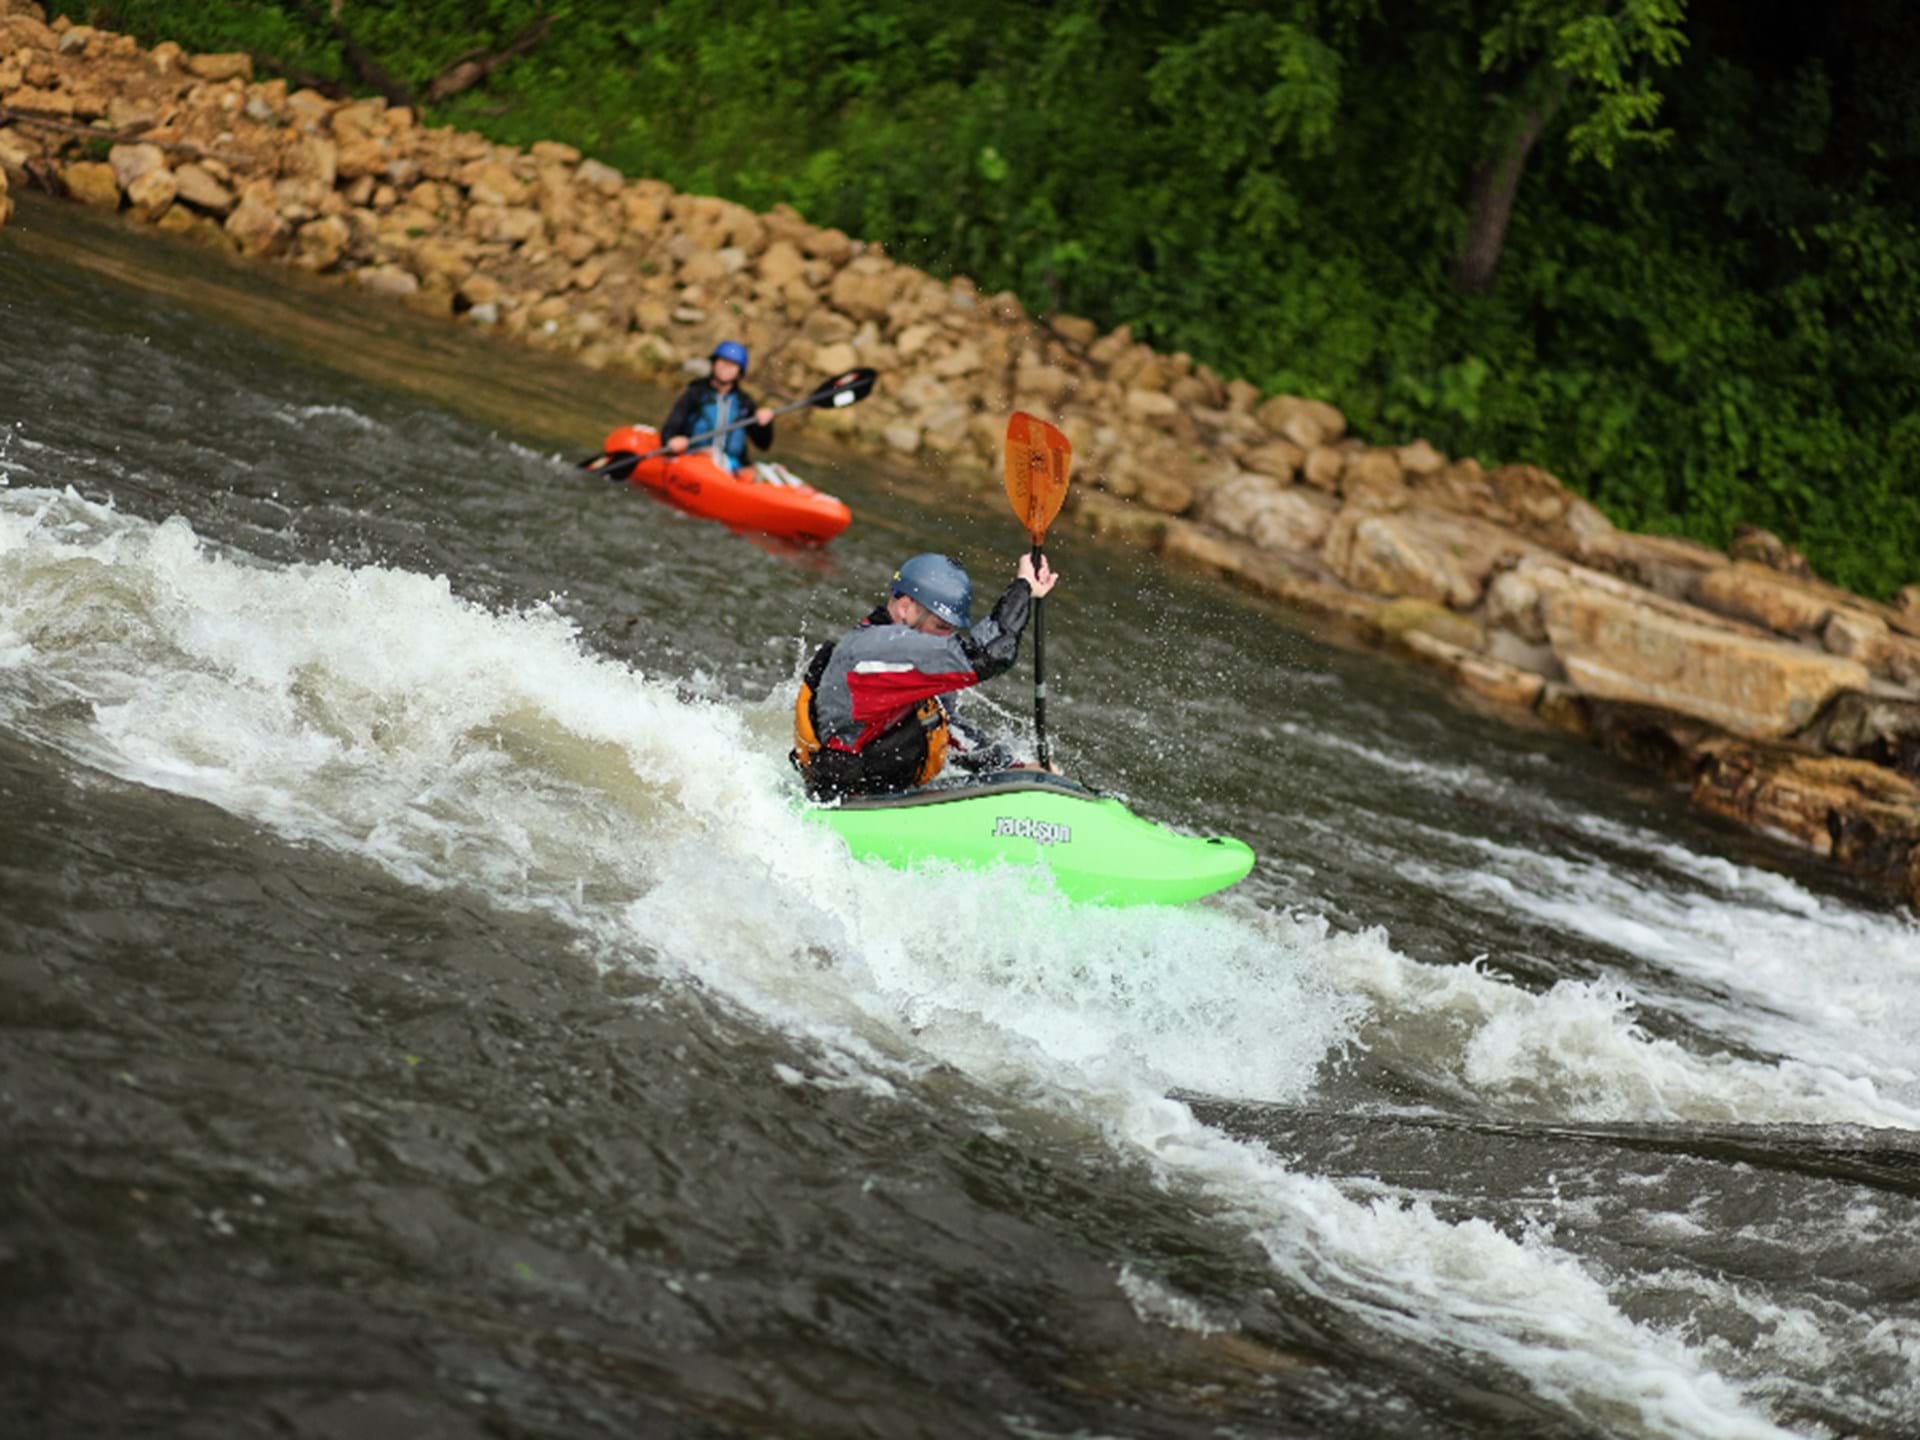 Manchester Whitewater Park